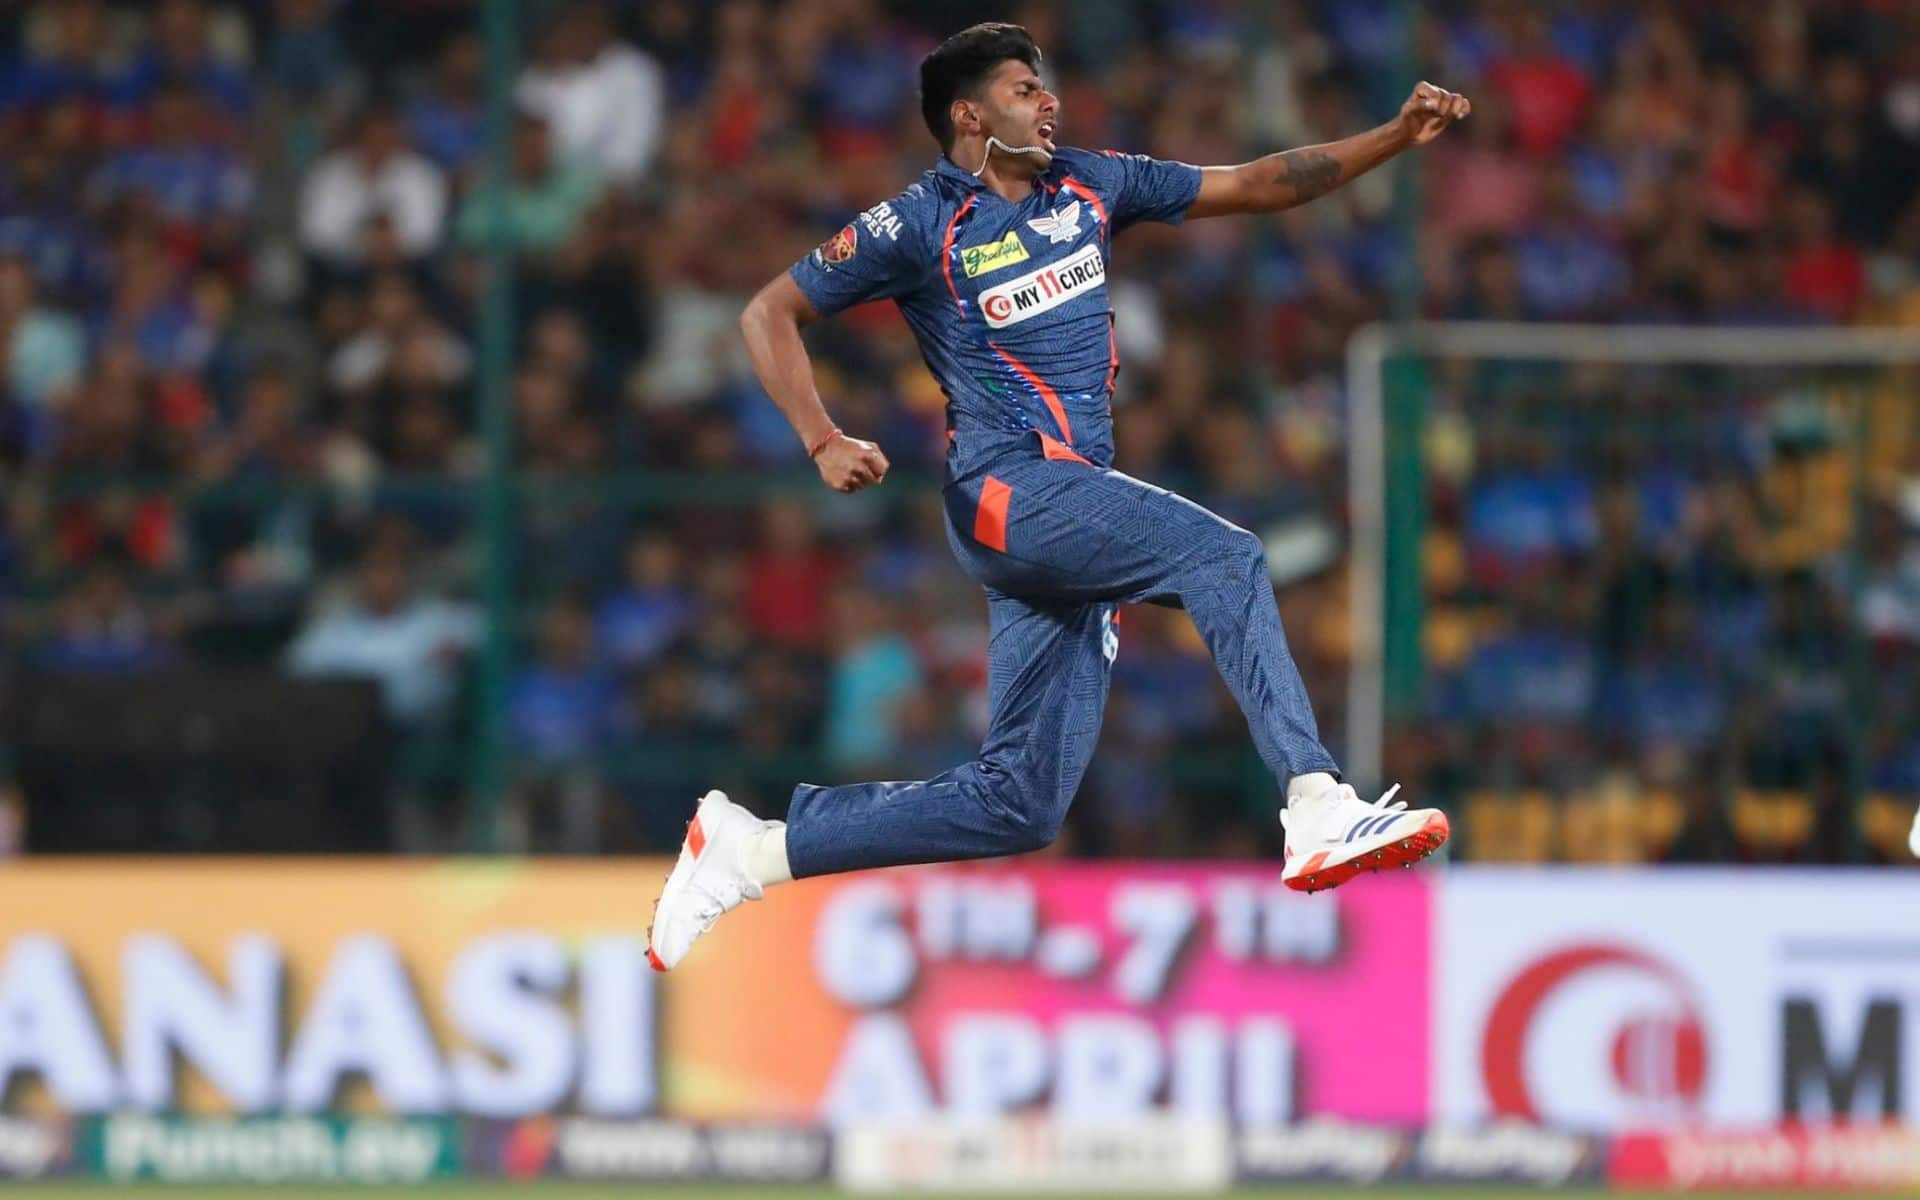 Mayank Yadav Creates History; Becomes Bowler With Most Deliveries Over 155 Kmph In IPL